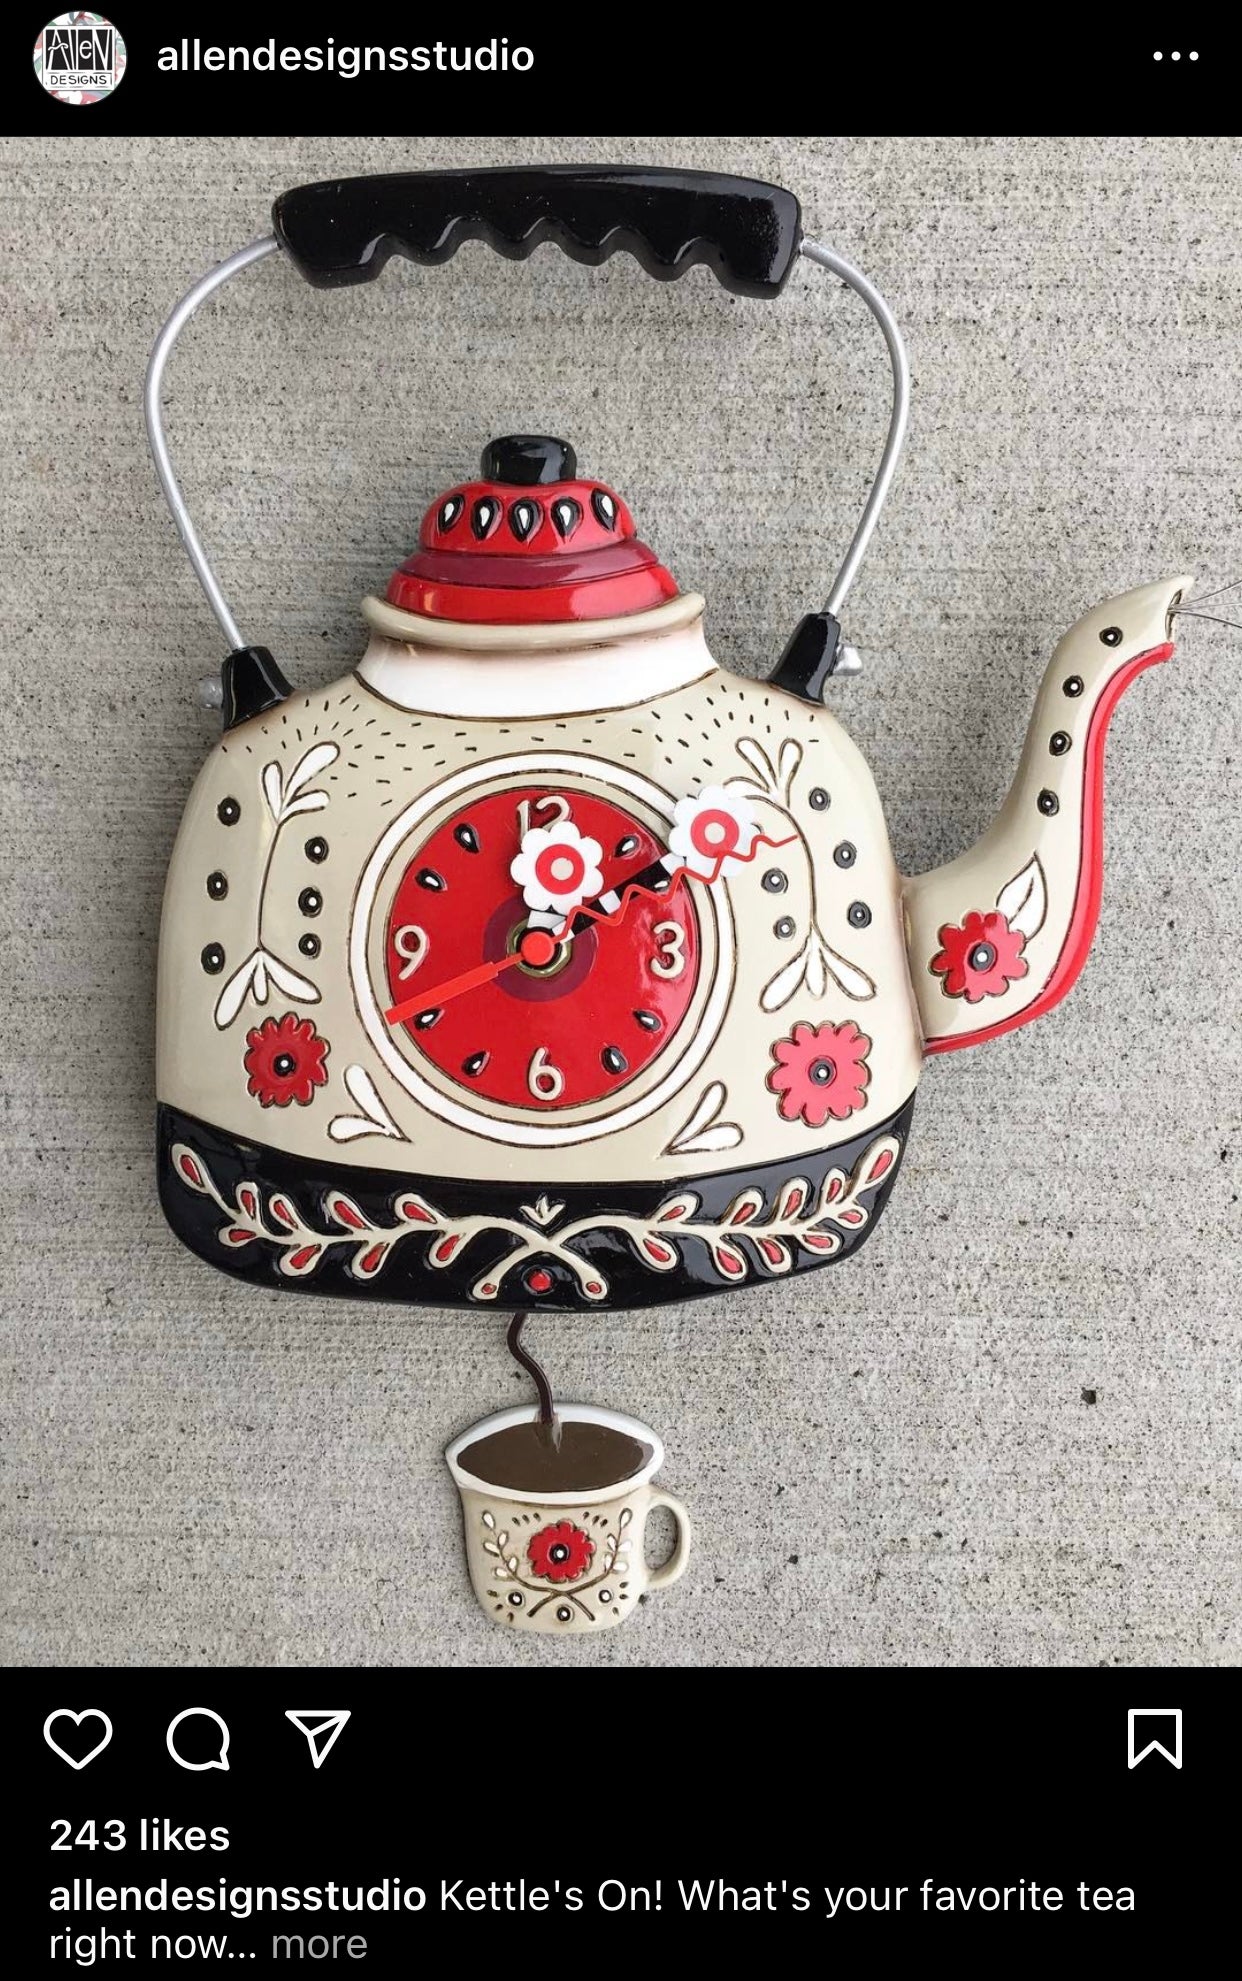 Clock Wall Kettle Teapot Kettles On Funky Retro - The Renmy Store Homewares & Gifts 